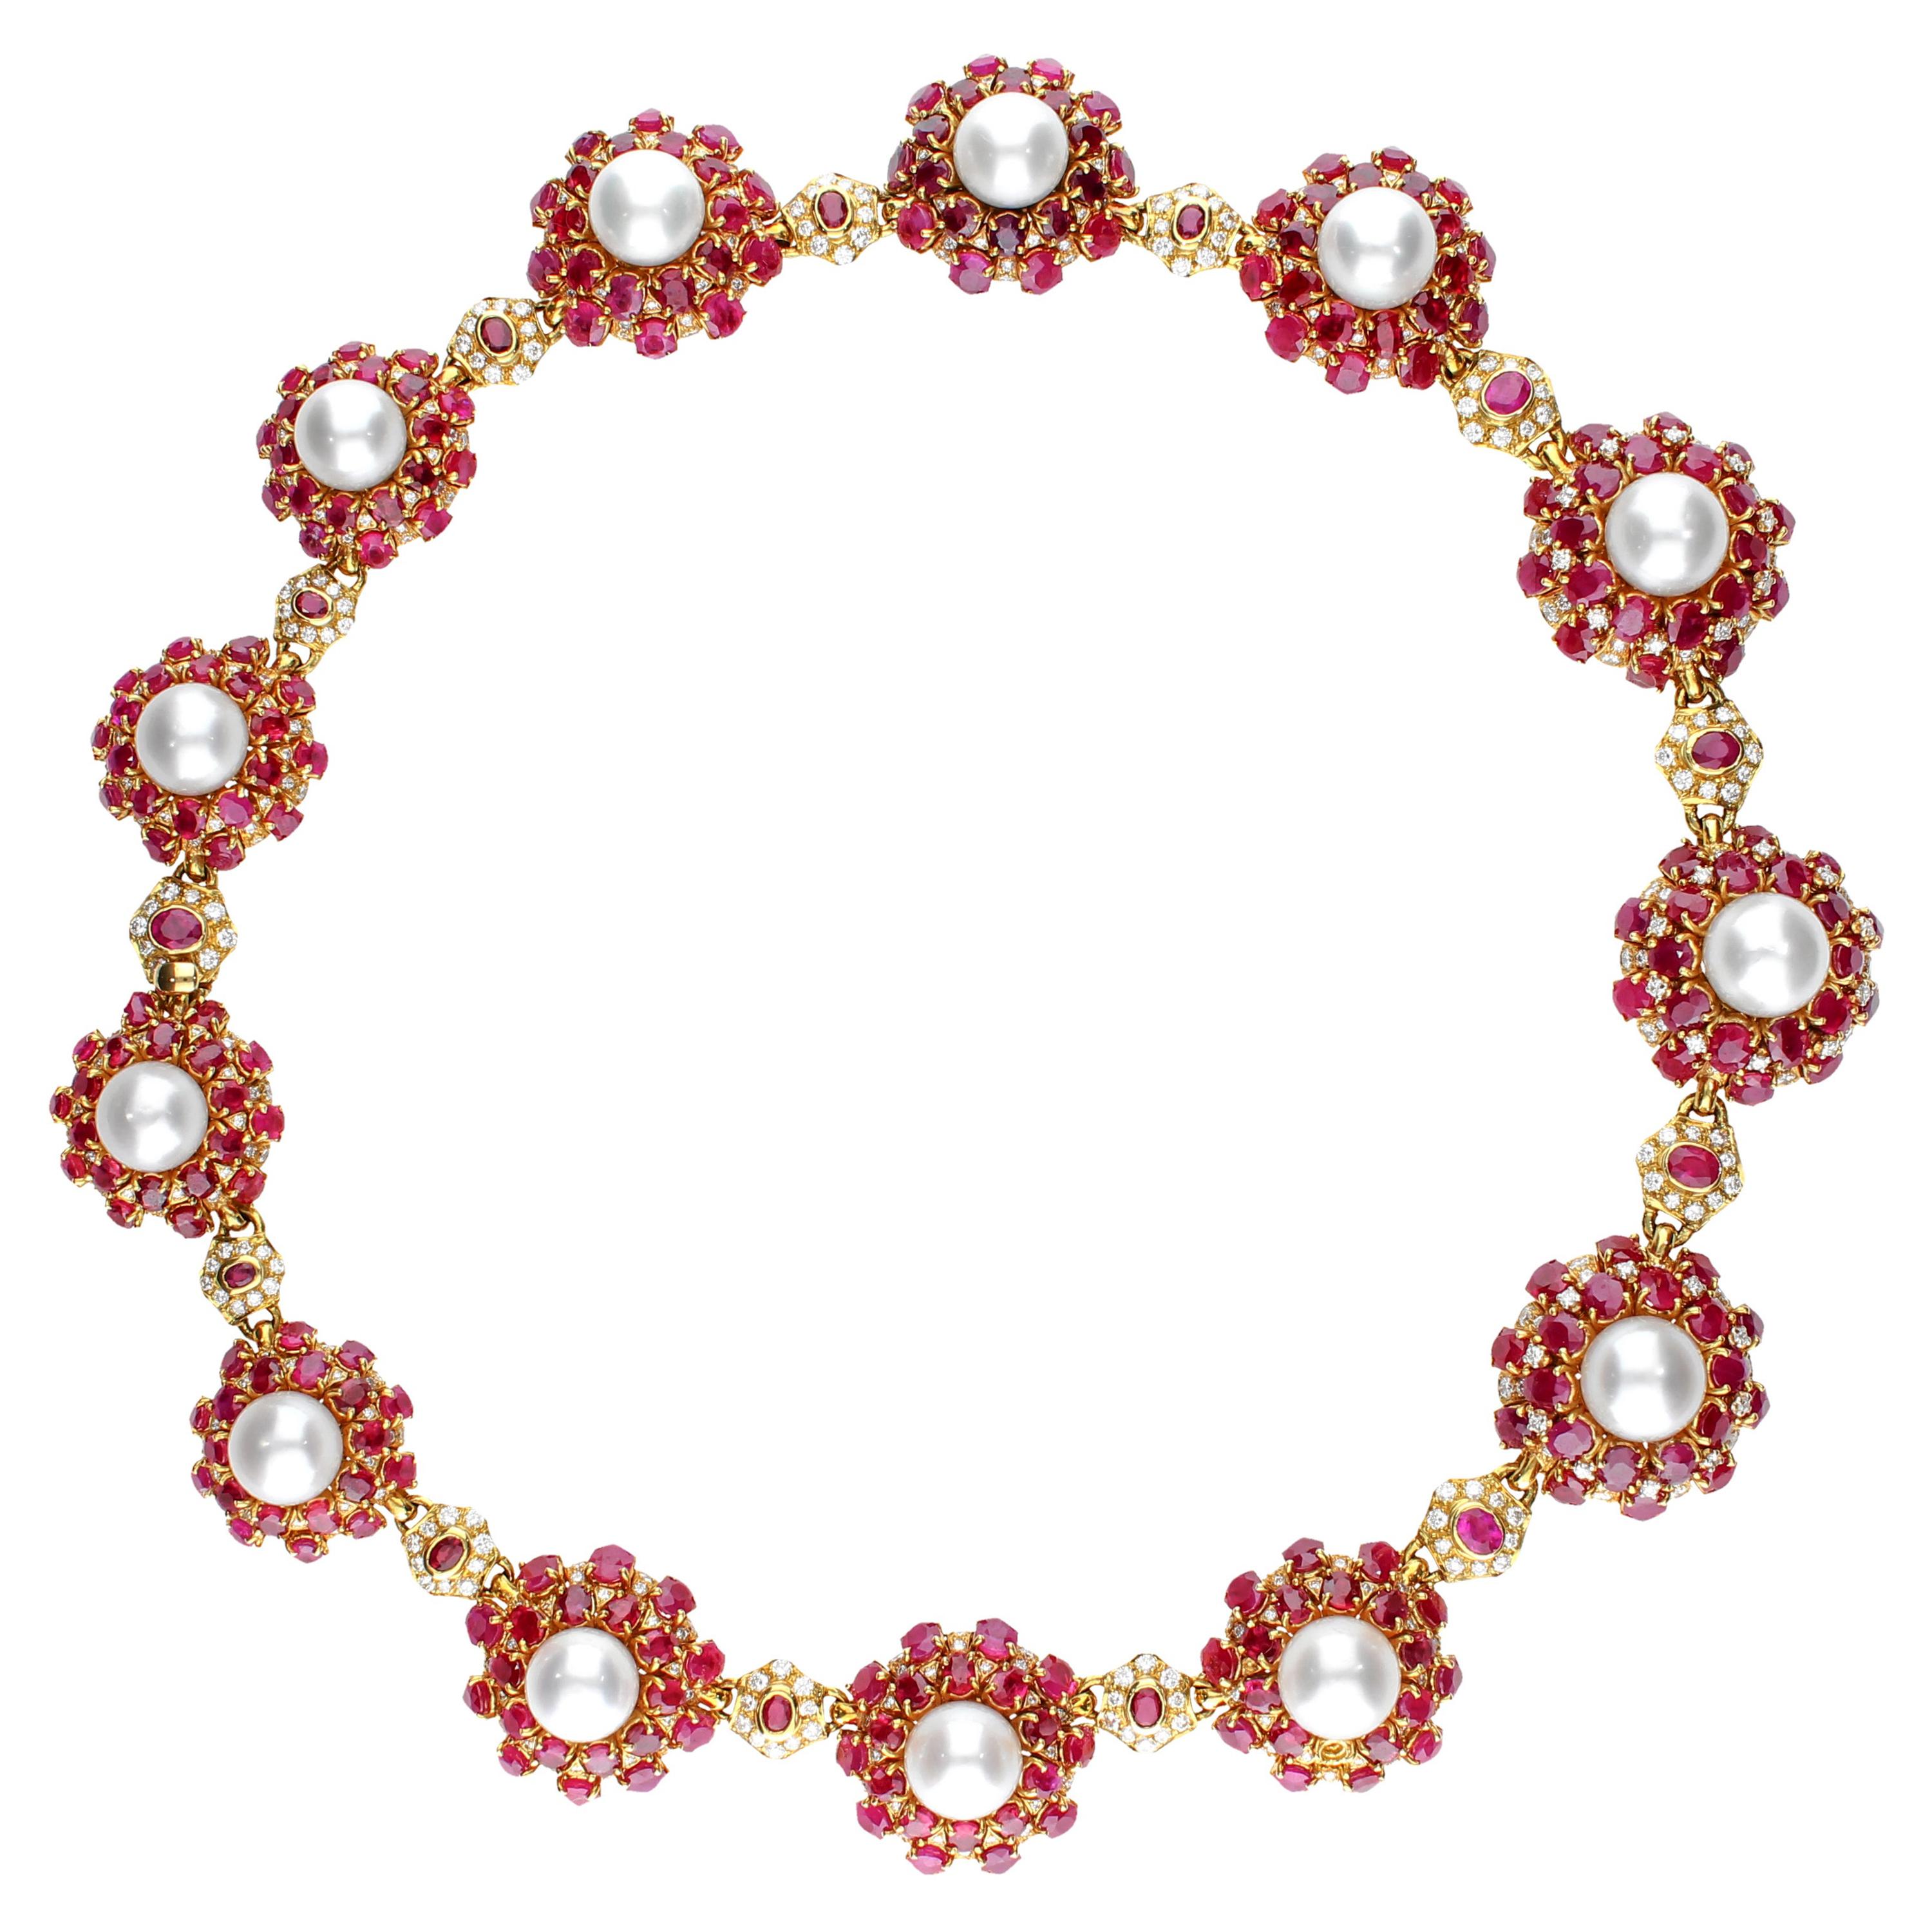 Necklace with Rubies, Pearls and Diamonds in 18 Karat Yellow Gold